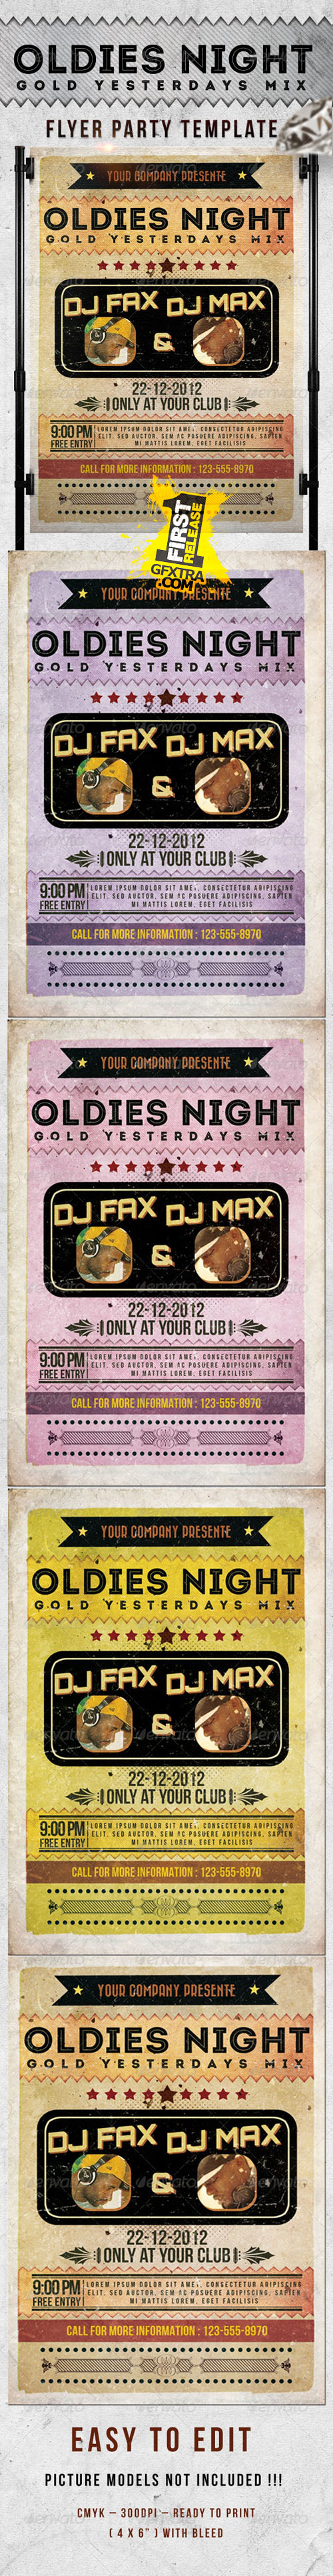 GraphicRiver: Oldies Night Party Flyer Template